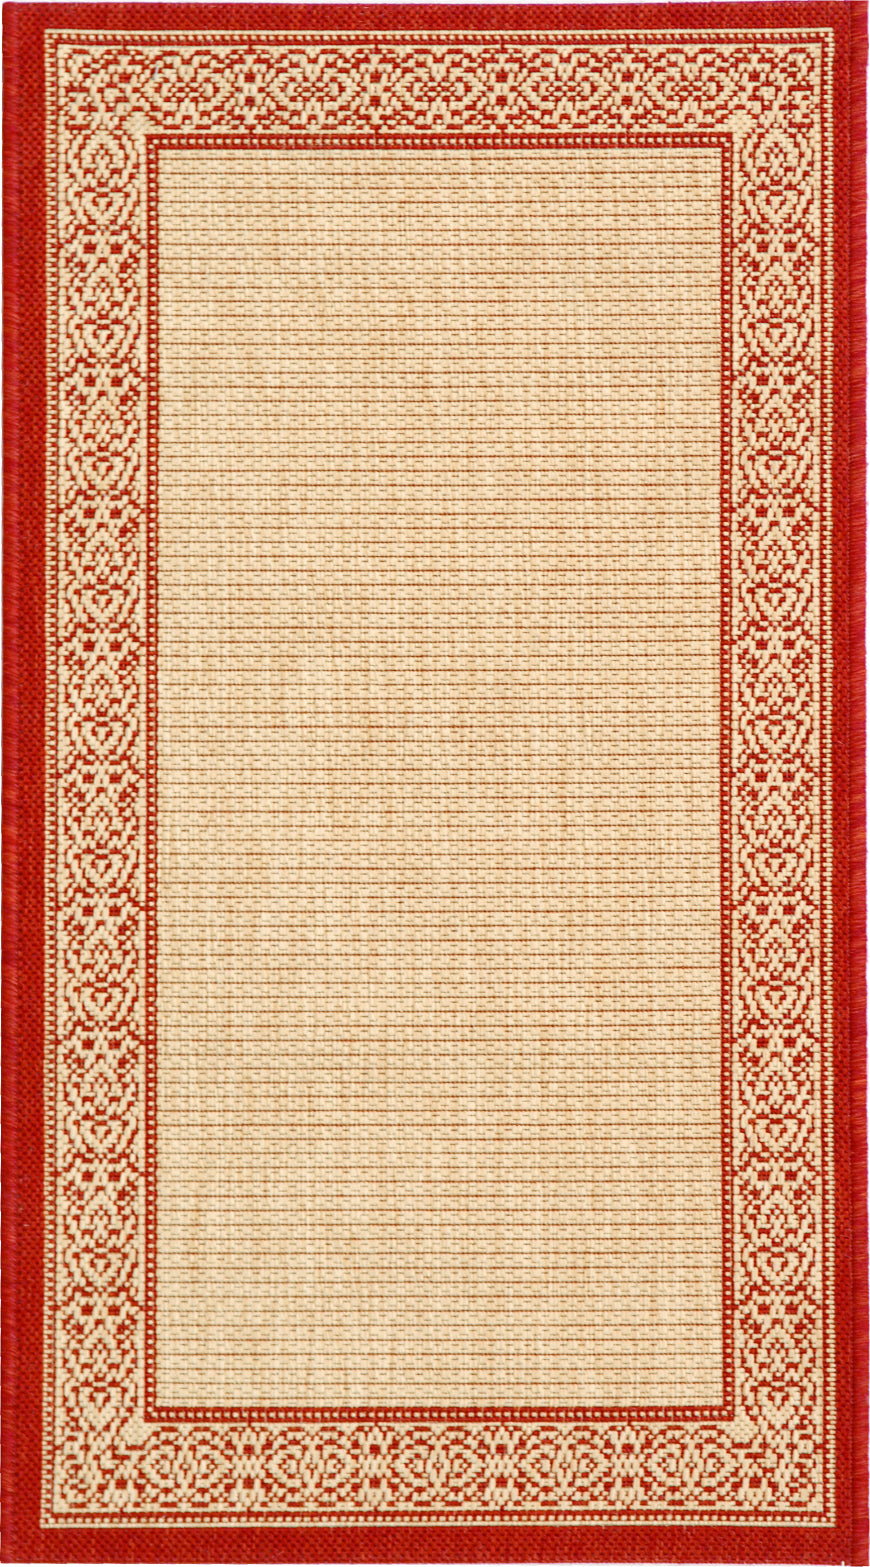 Safavieh Courtyard CY2099 Natural/Red Area Rug main image